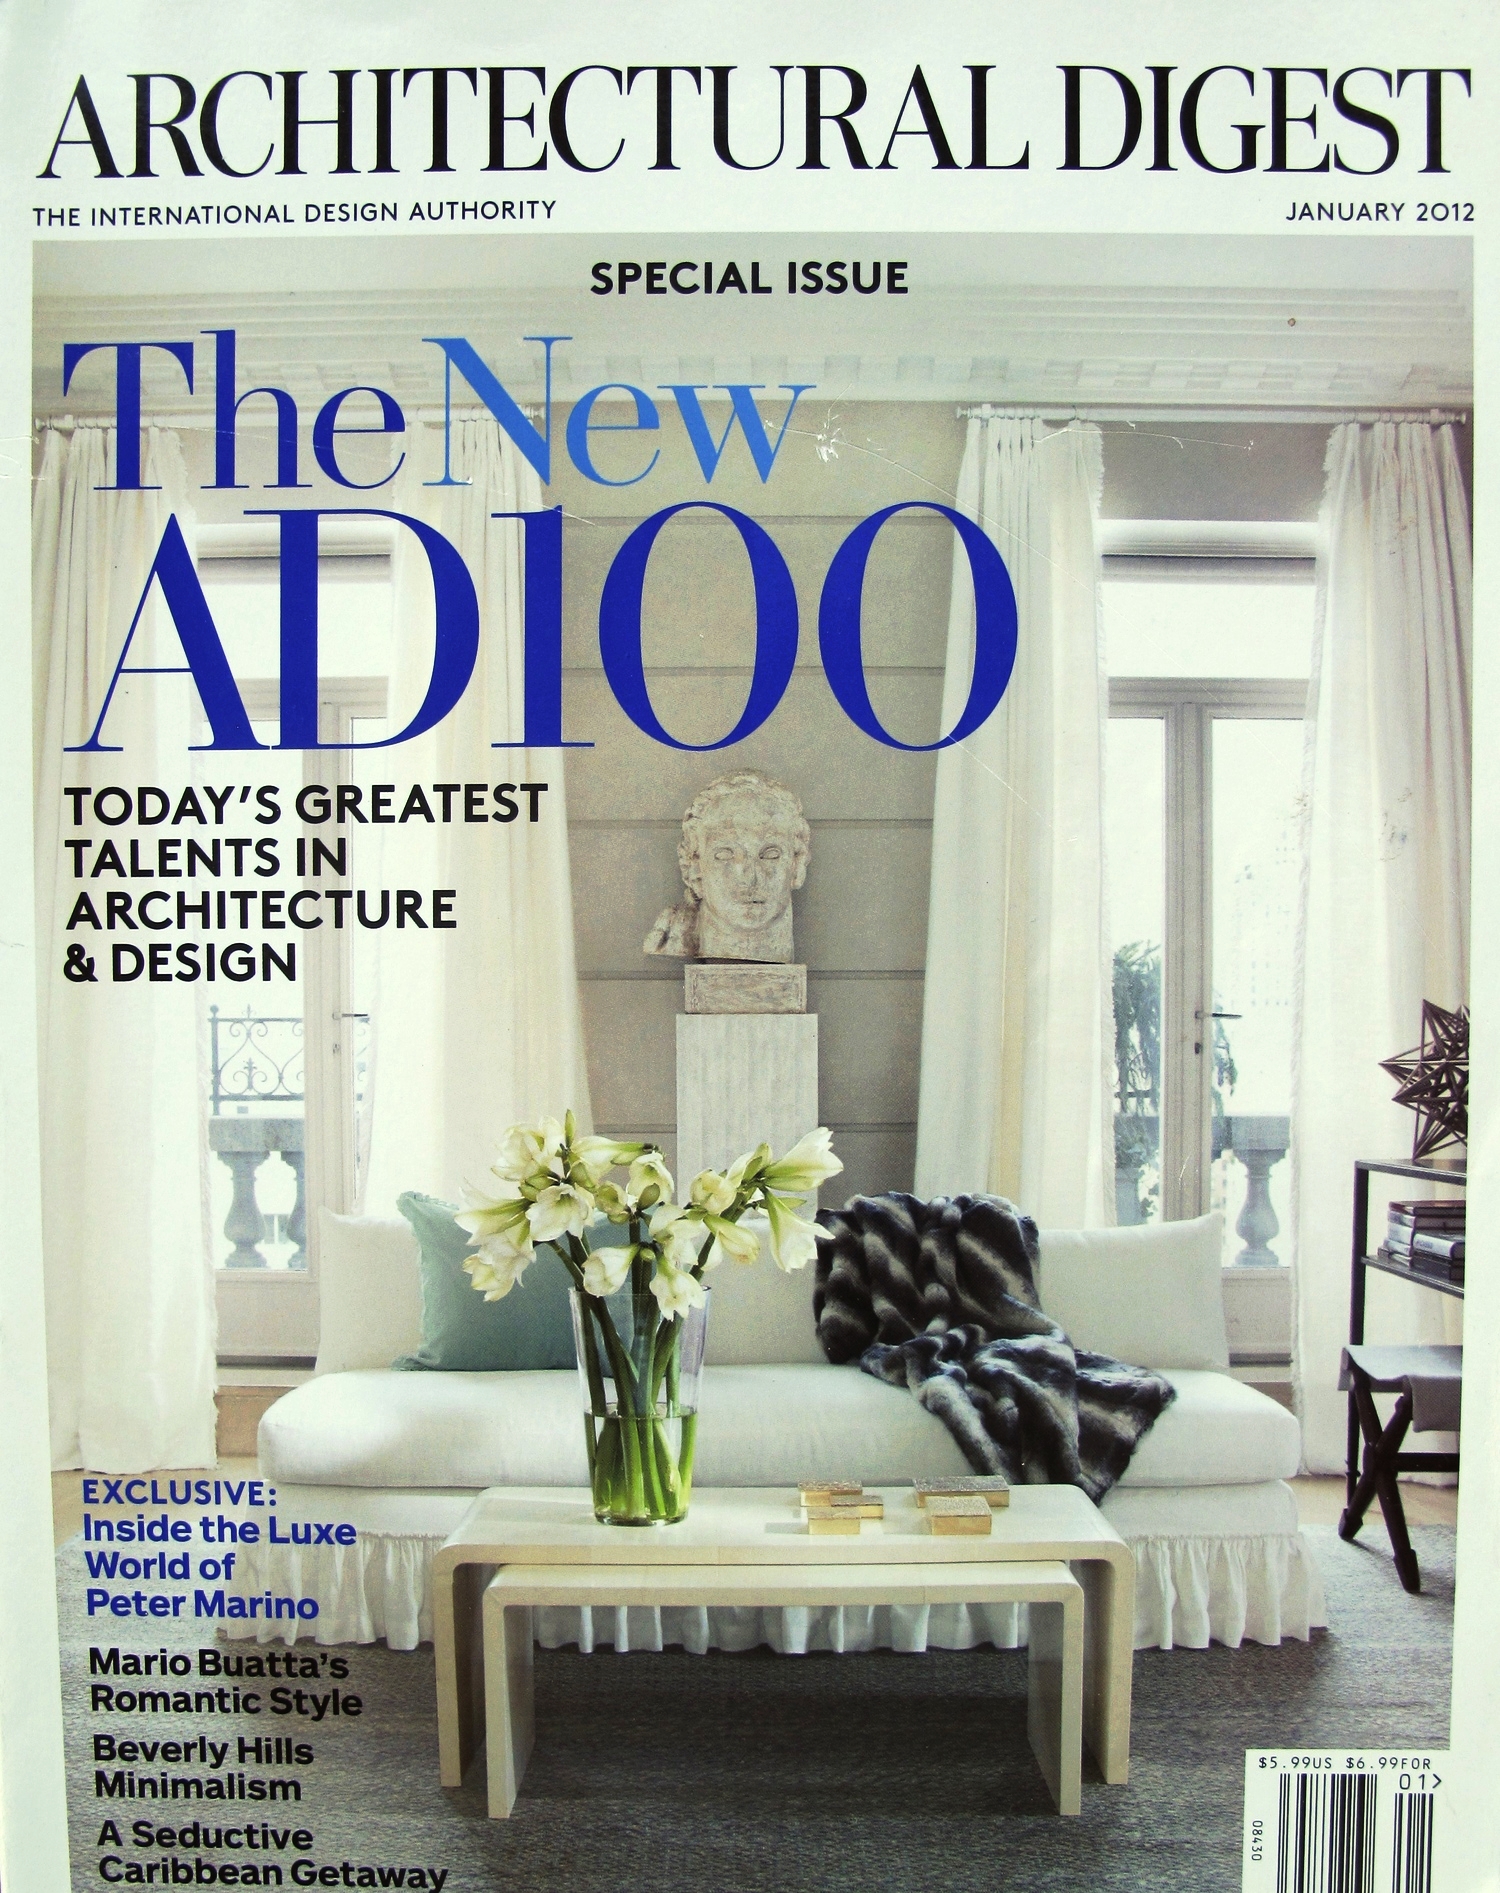 AD100 cover.JPG